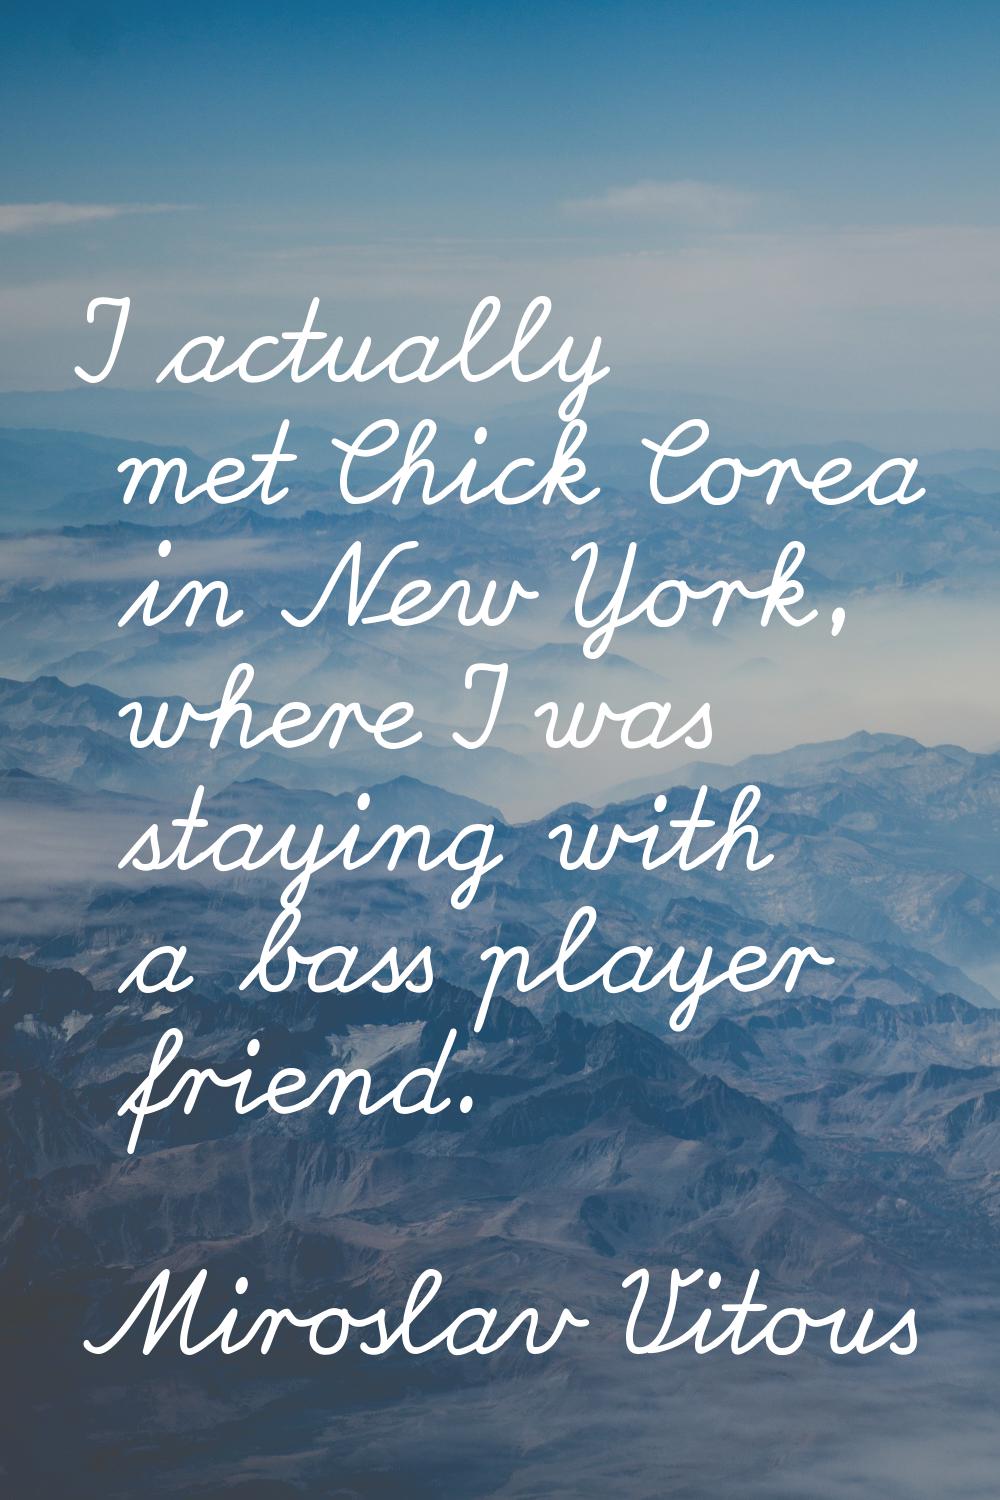 I actually met Chick Corea in New York, where I was staying with a bass player friend.